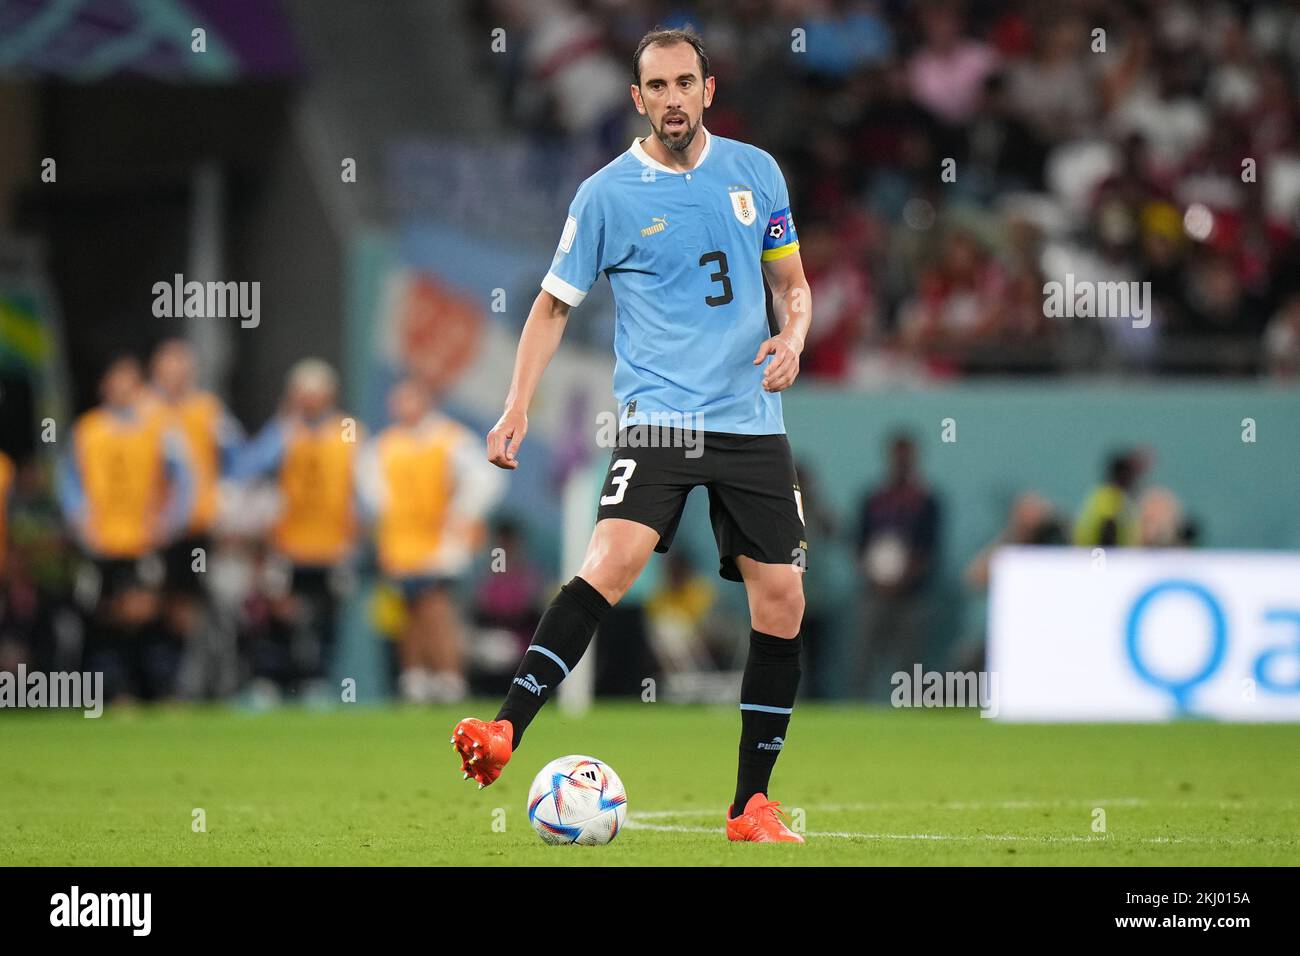 Rayan, Qatar. 23rd Nov, 2022. Diego Godin of Uruguay during the Qatar 2022 World Cup match, group H, date 1, between Uruguay and Korea Republic played at Education City Stadium on Nov 24, 2022 in Rayan, Qatar. (Photo by Bagu Blanco/PRESSINPHOTO) Credit: PRESSINPHOTO SPORTS AGENCY/Alamy Live News Stock Photo